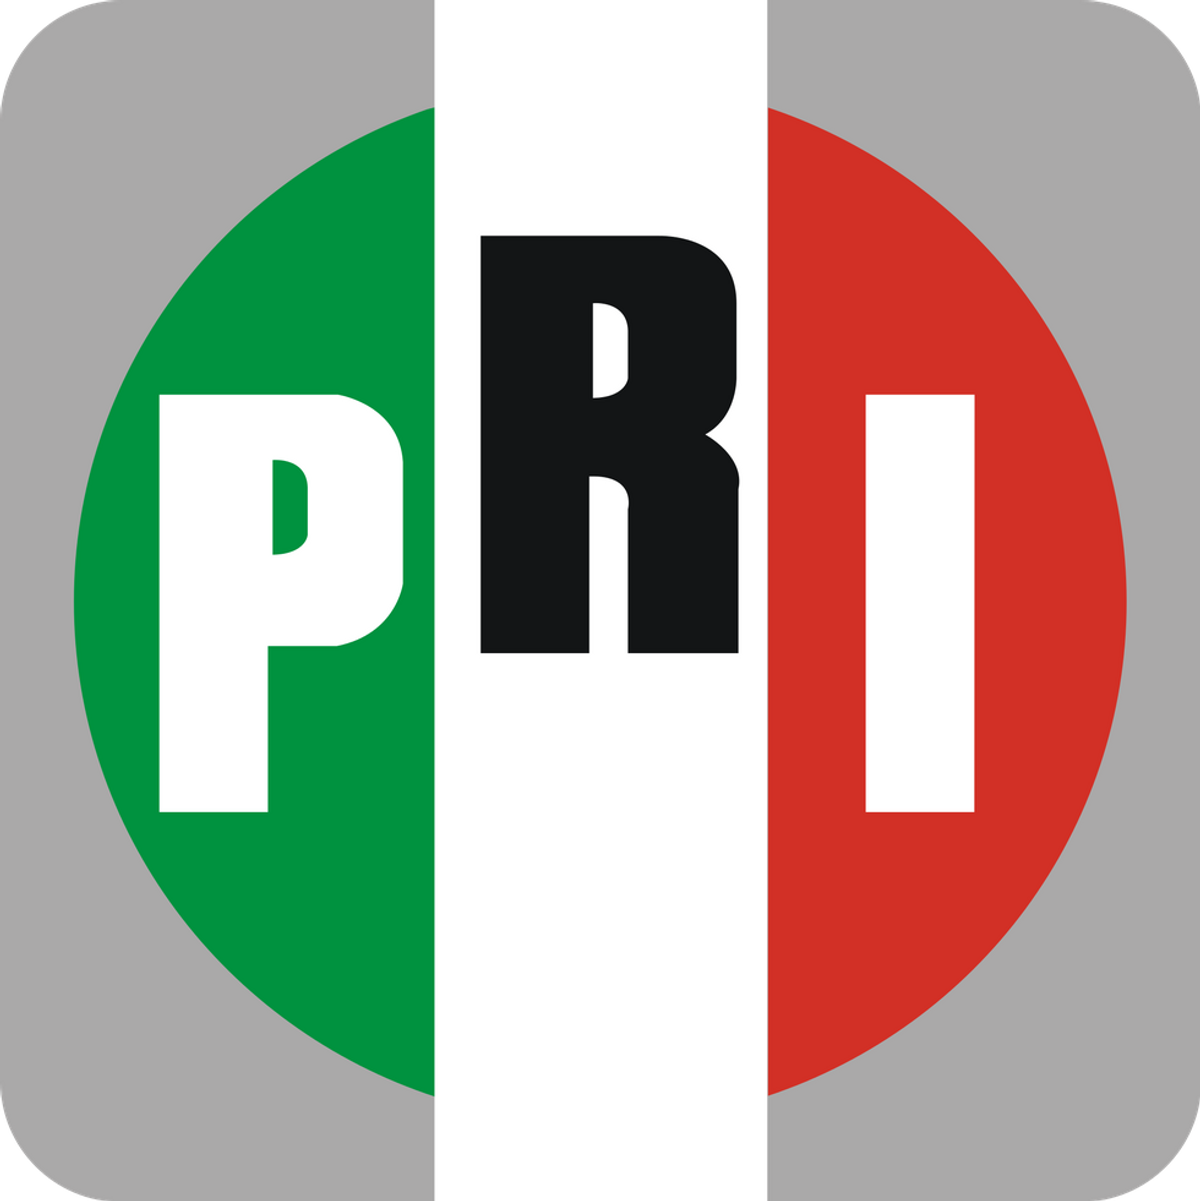 The PRI's Influence In The Mexican Economy